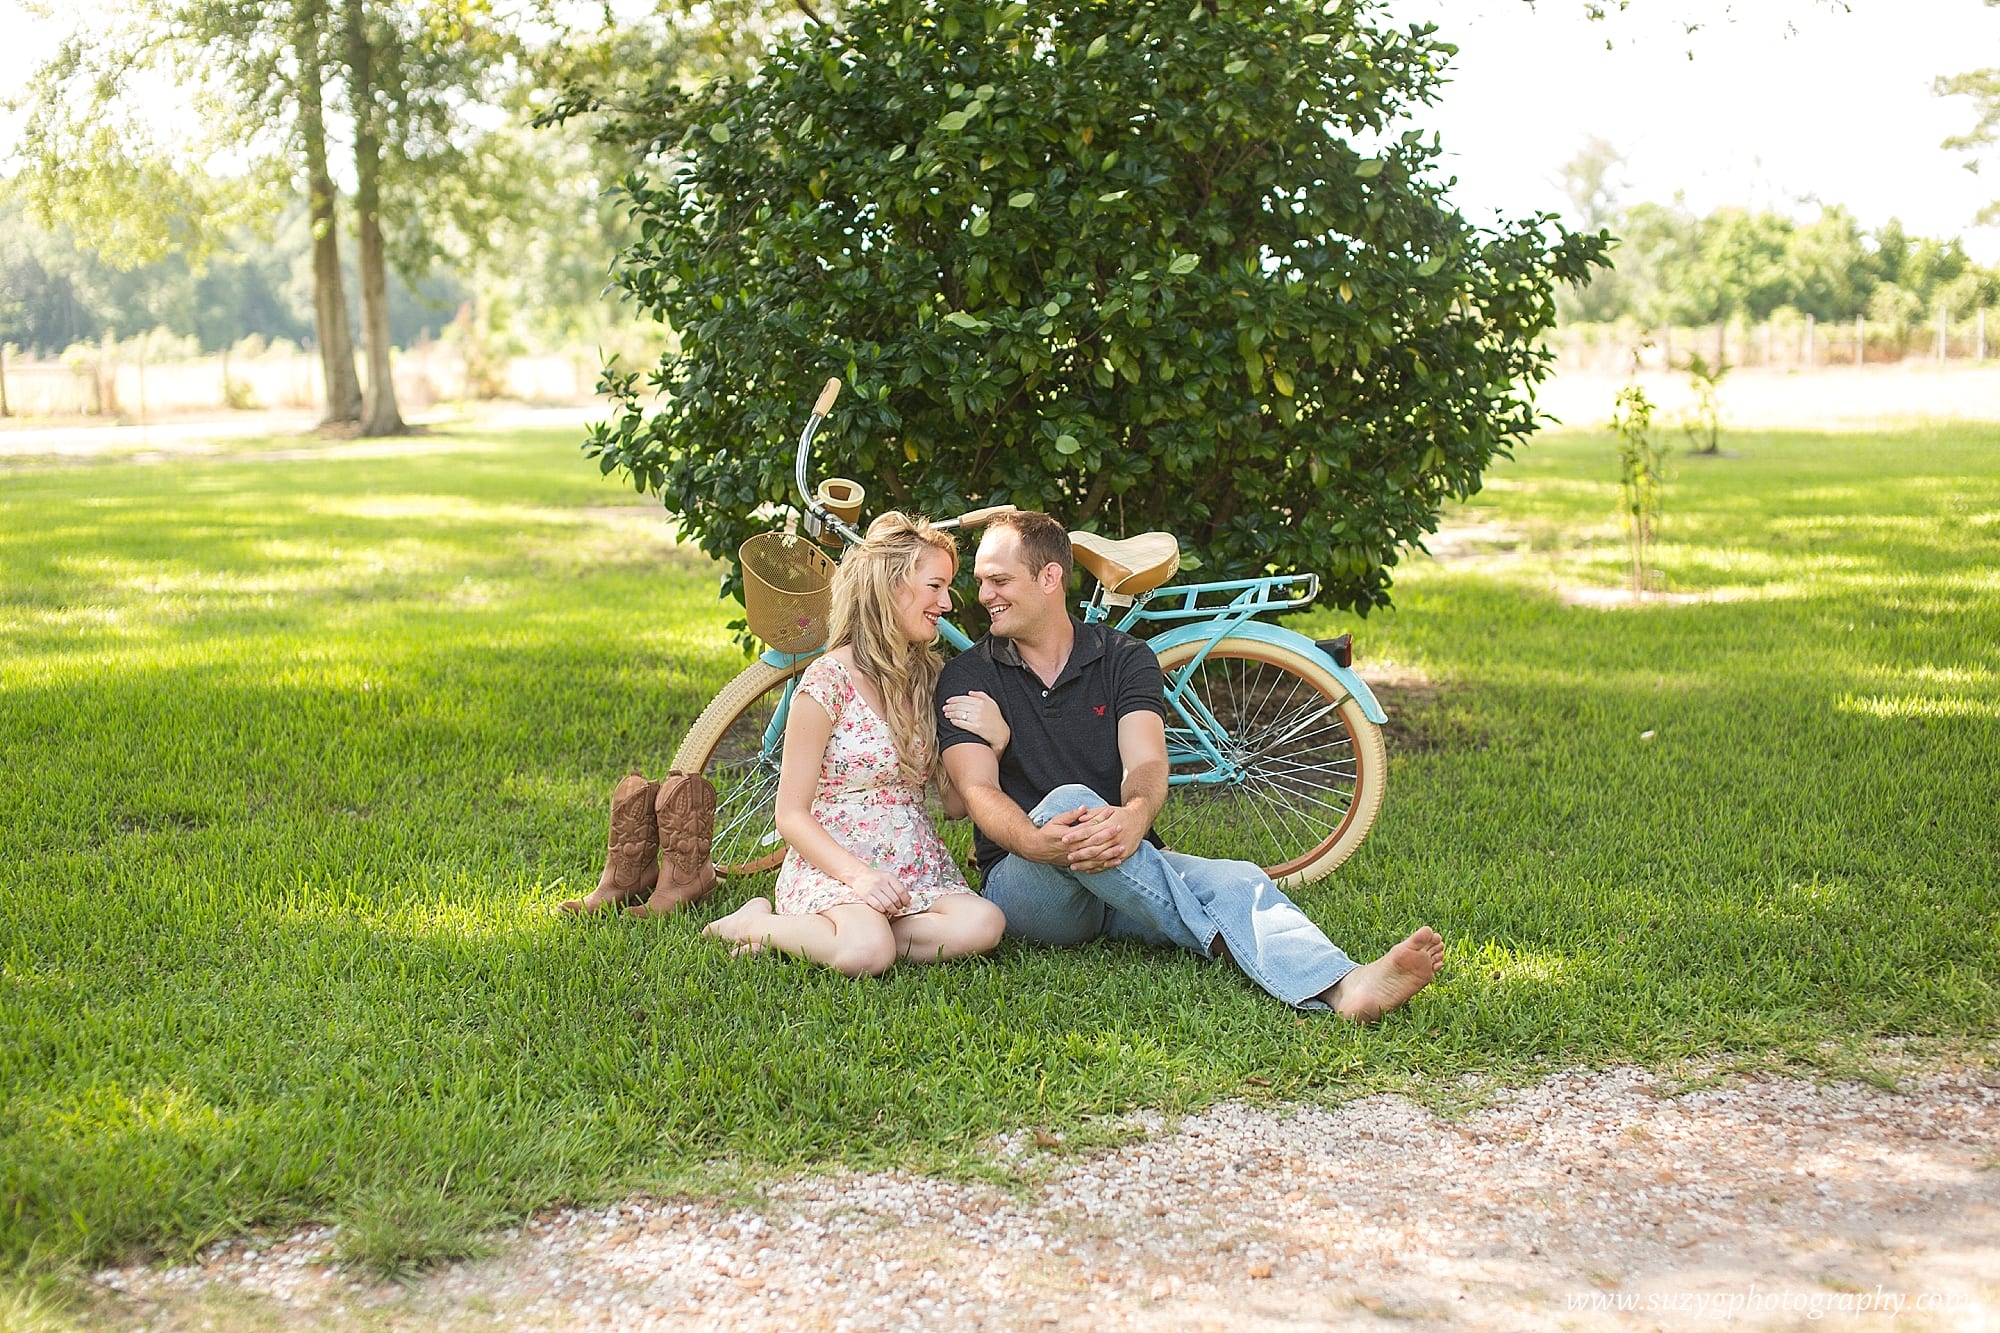 engagements-new orleans-texas-baton rouge-lake charles-suzy g-photography-suzygphotography_0004